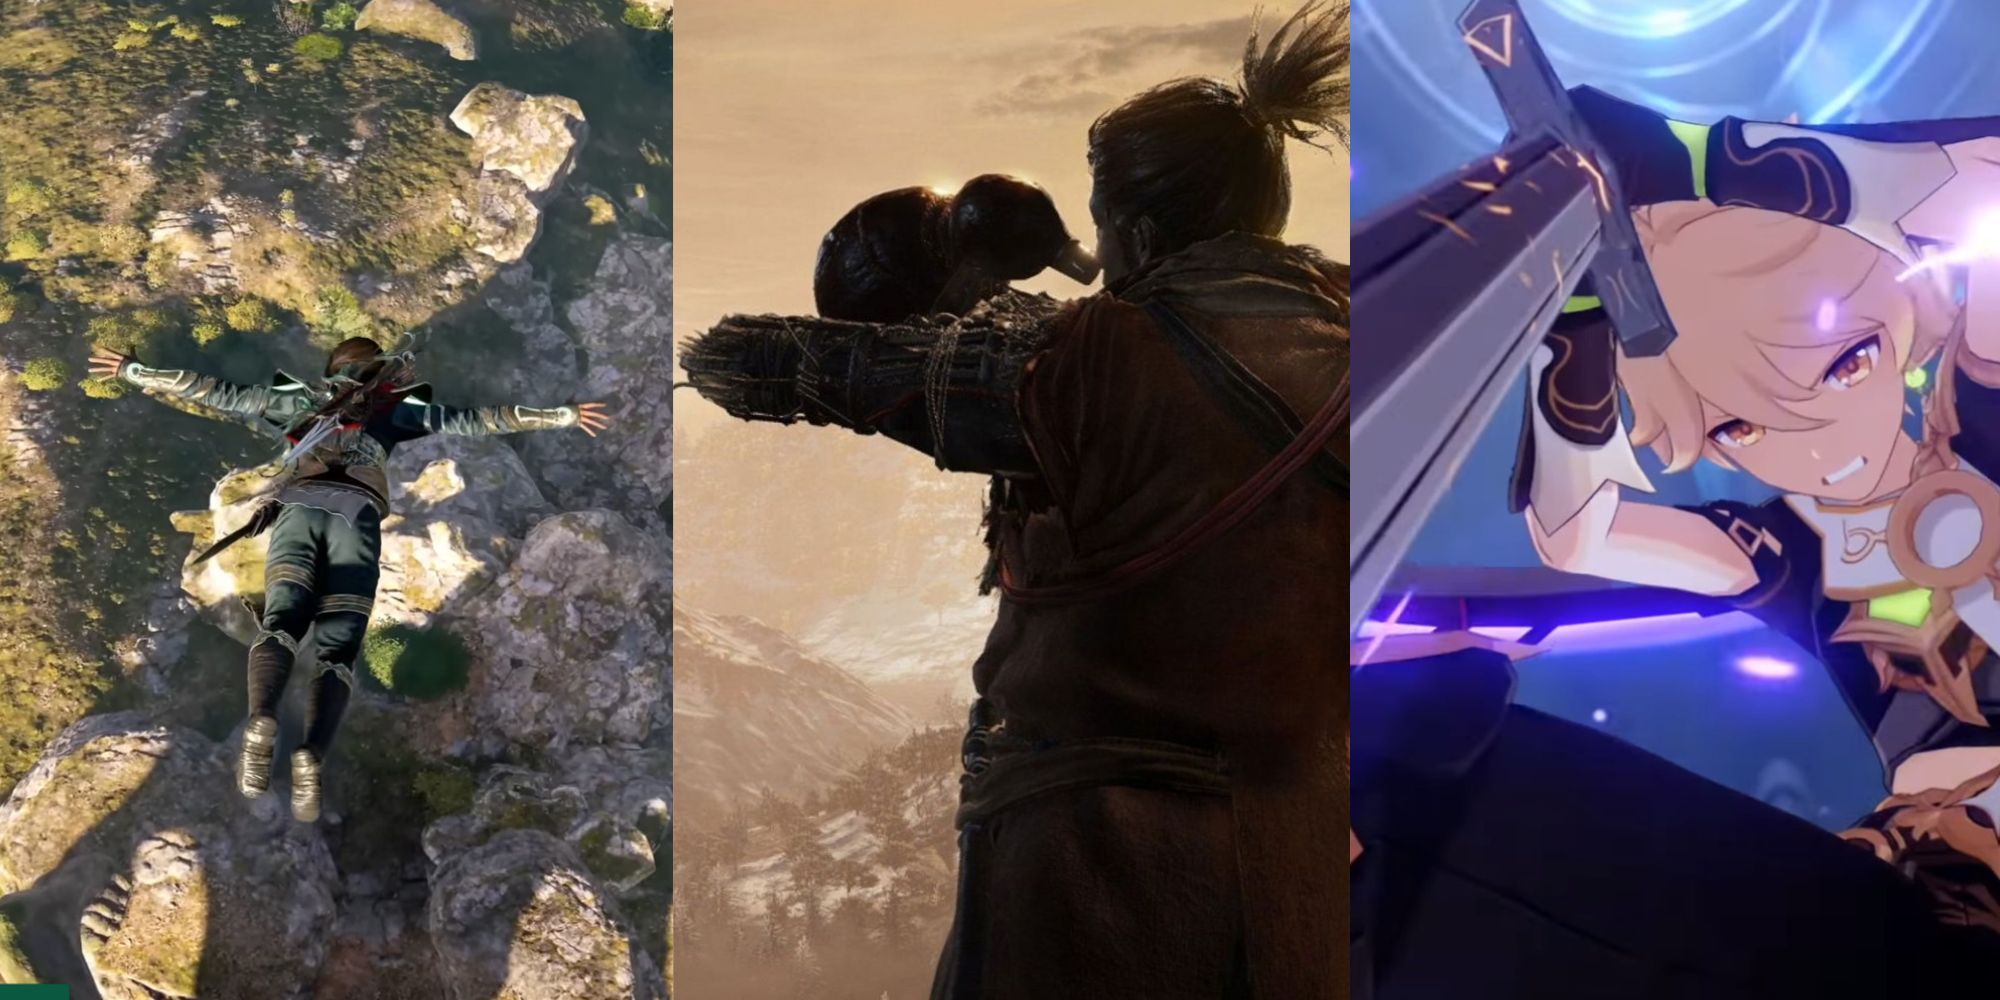 Dumb Ways To Die In Video Games featuring Kassandra jumping in Assassin's Creed Odyssey, Sekiro: Shadows Die Twice, and Aether with the dull blade from Genshin Impact